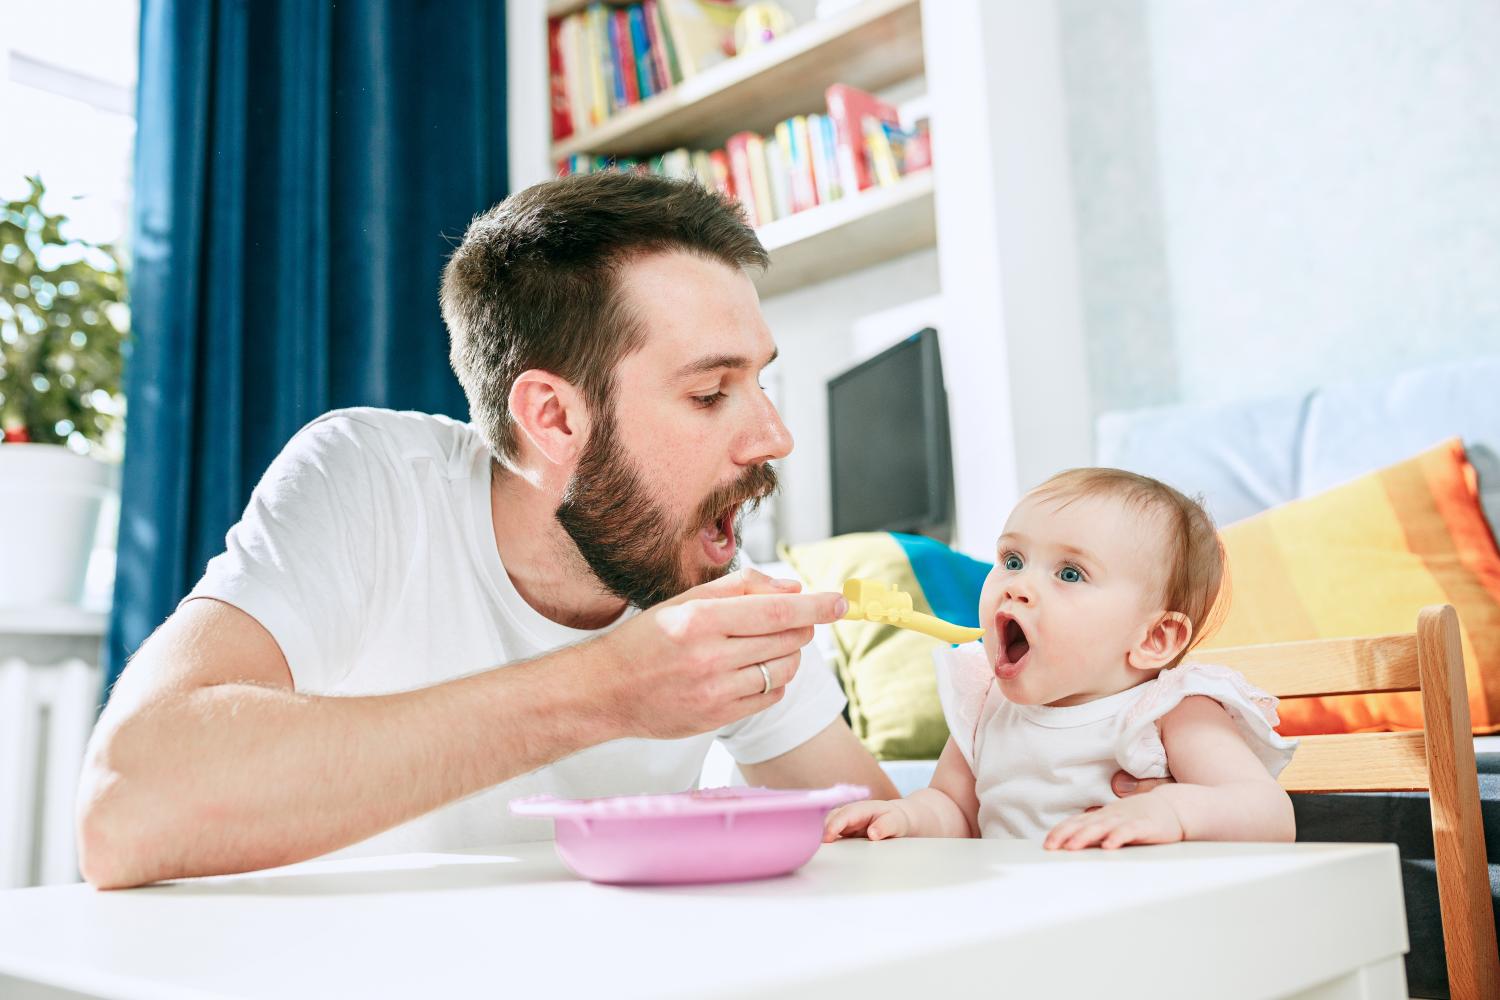 treating feeding aversion in infants through occupational therapy